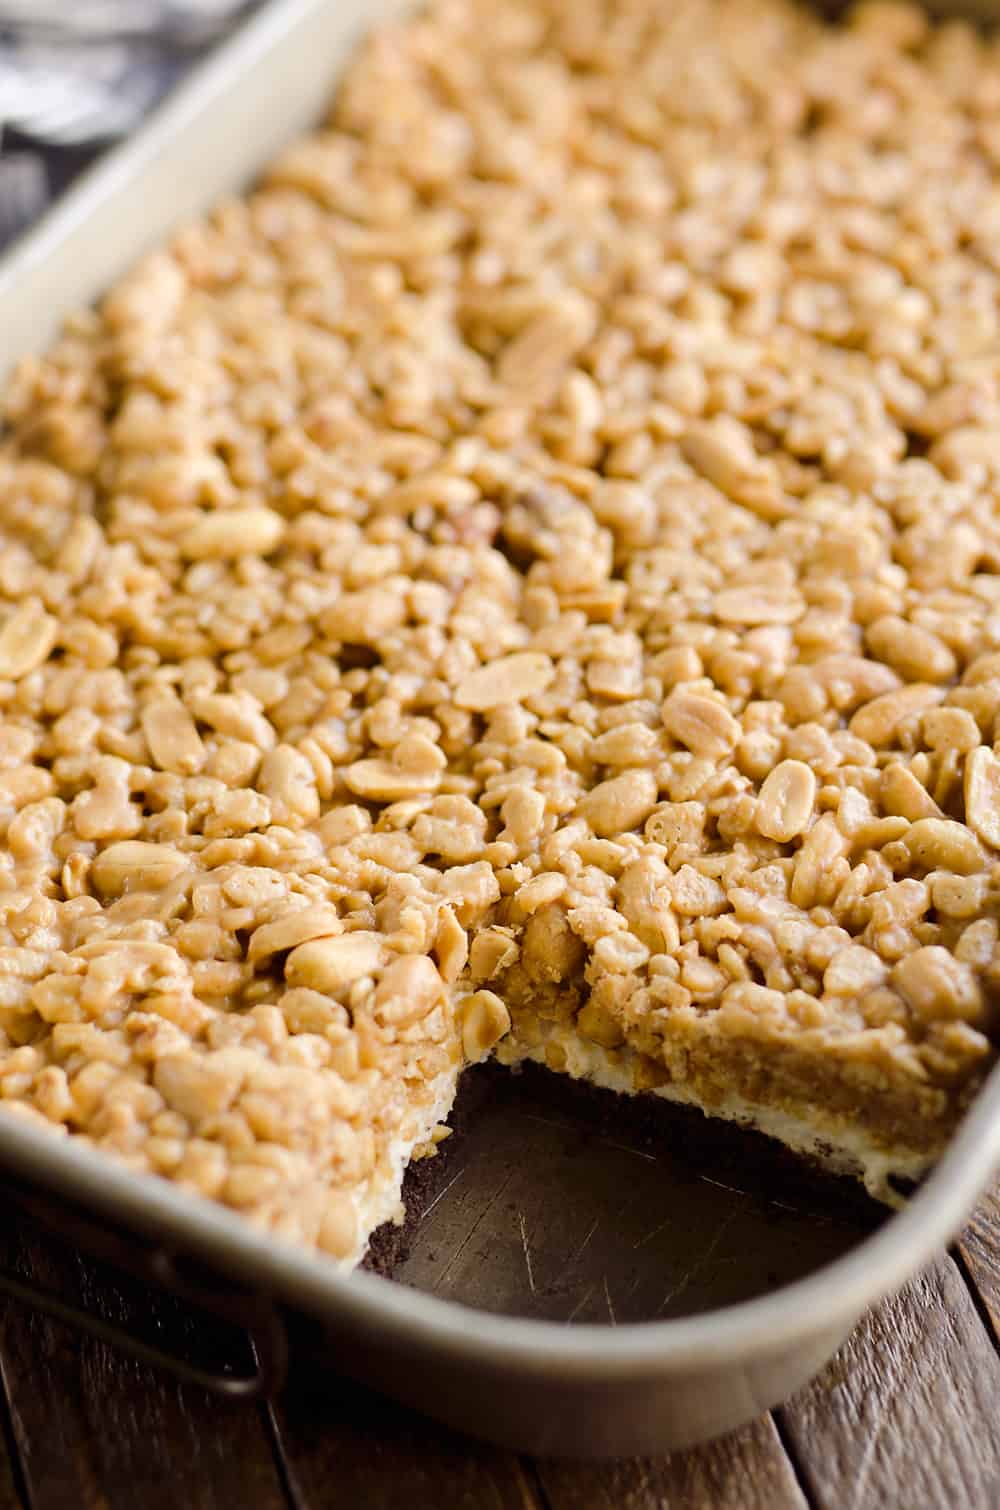 Crunchy Peanut Butter Marshmallow Bars are a sweet and salty dessert everyone will love! A chocolate crust is topped with marshmallows and a crunchy peanut butter and rice crispie mixture for a delicious treat. 